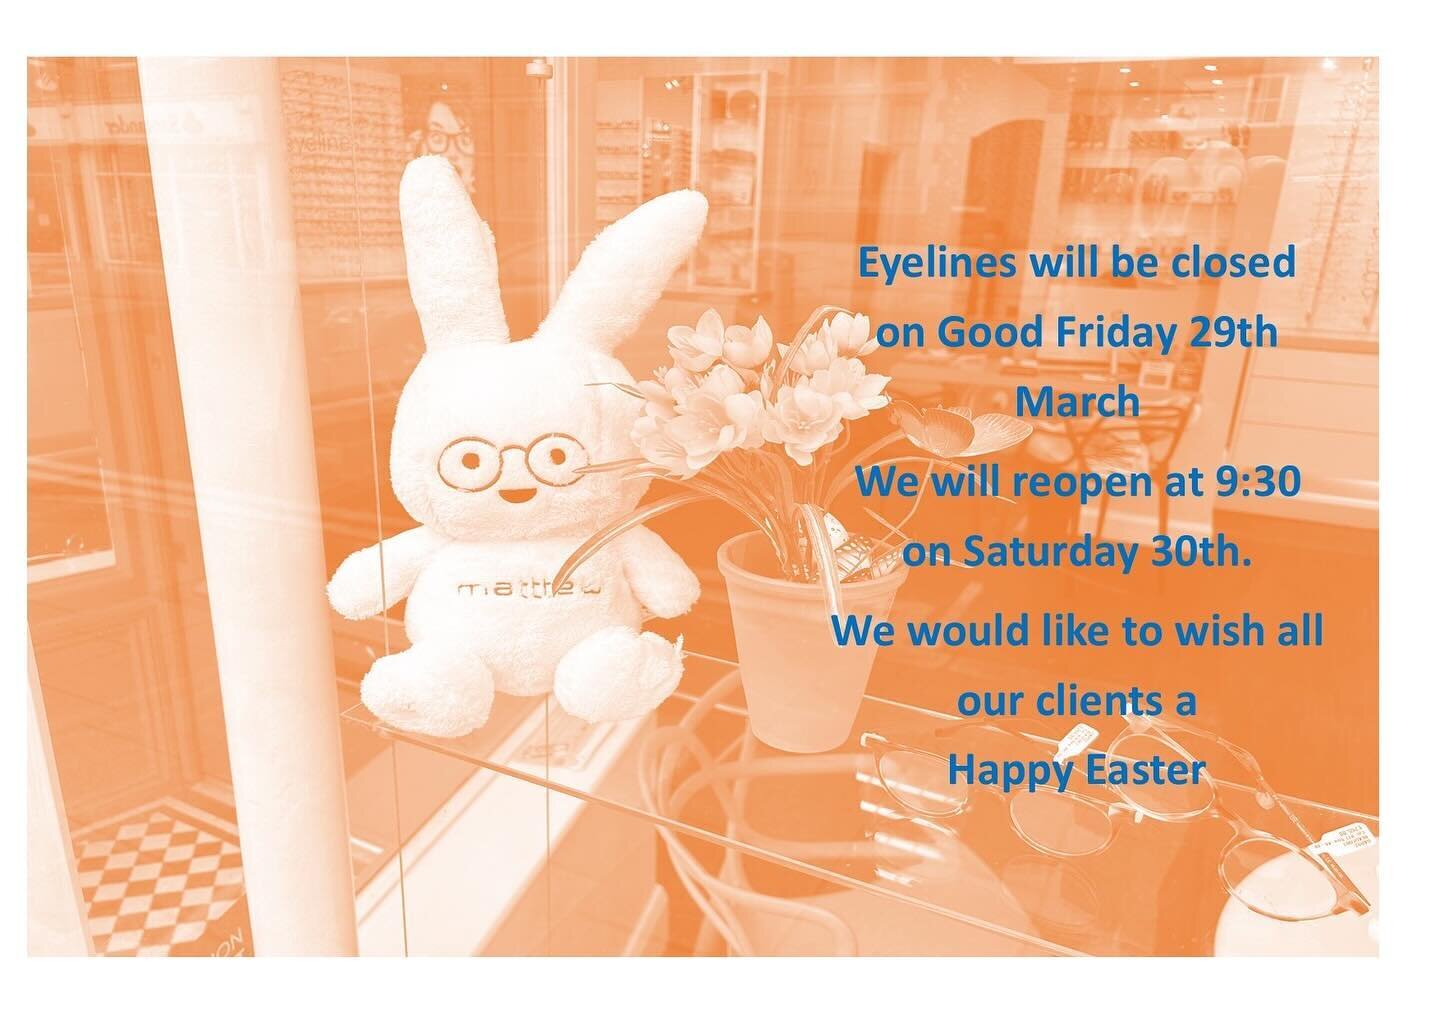 We will be closed on Good Friday open again as normal on Saturday #easter